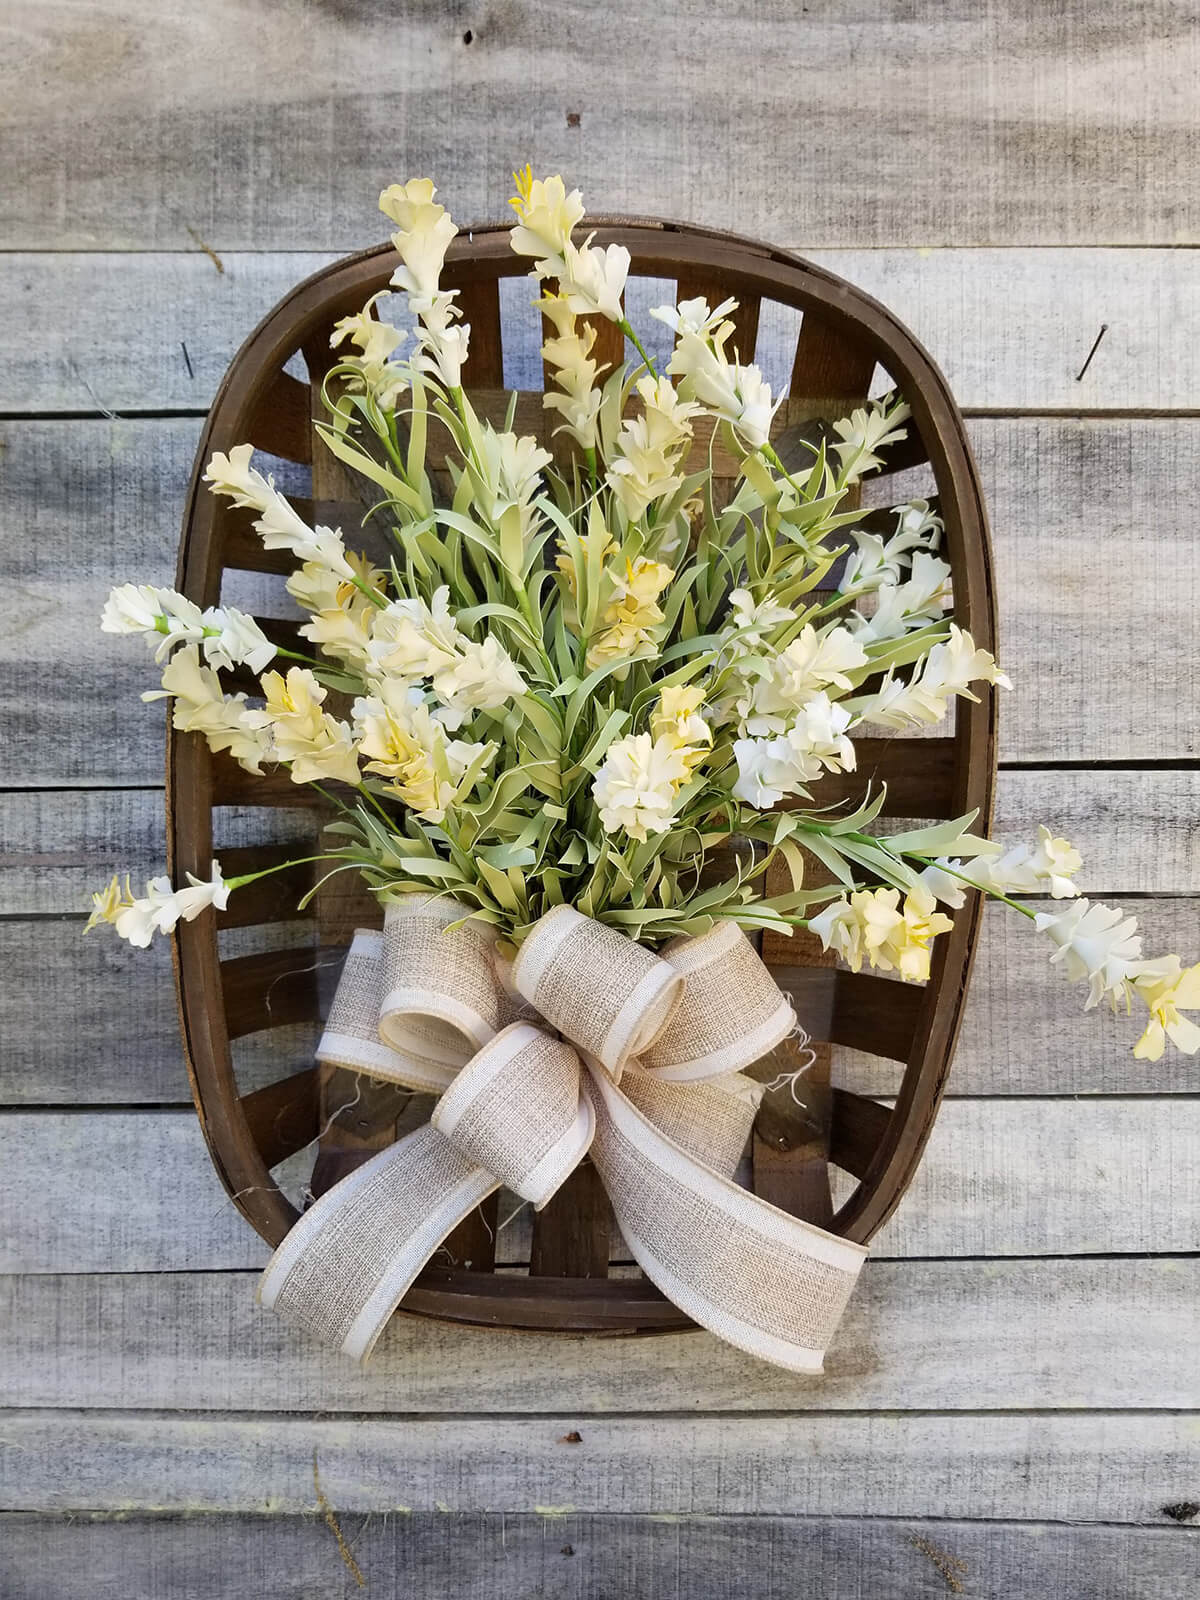 Charming Mounted Bouquet Basket